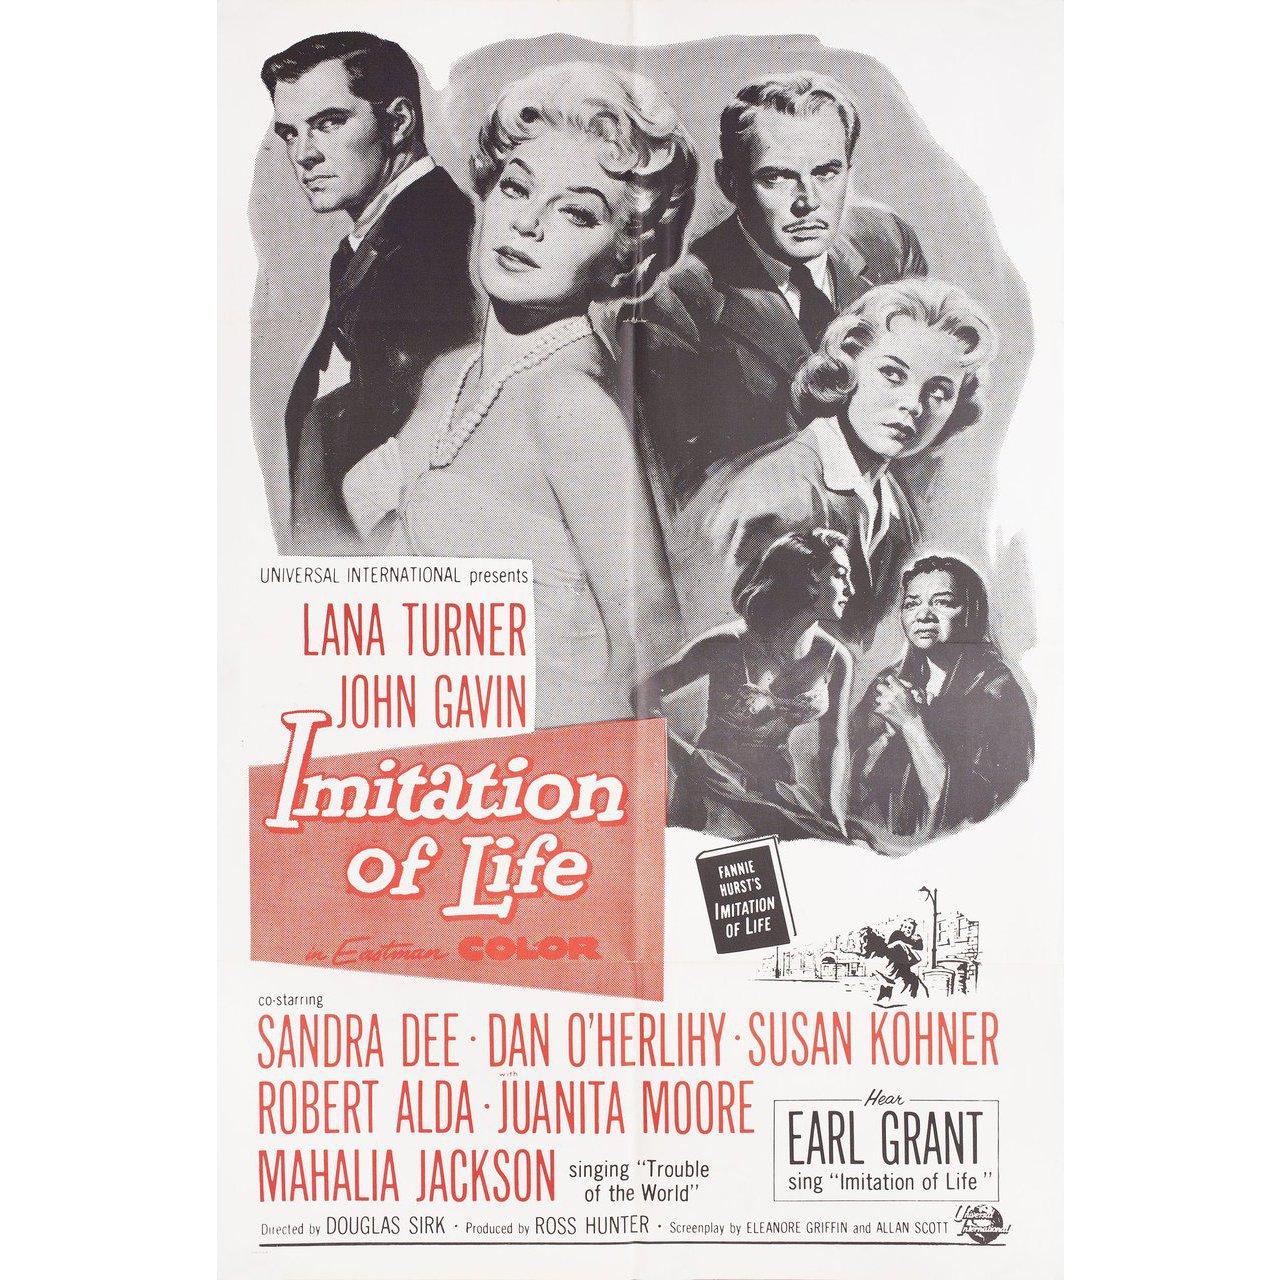 Original 1959 U.S. one sheet poster by Reynold Brown for the film 'Imitation of Life' directed by Douglas Sirk with Lana Turner / John Gavin / Sandra Dee / Susan Kohner. Very good-fine condition, folded. Many original posters were issued folded or